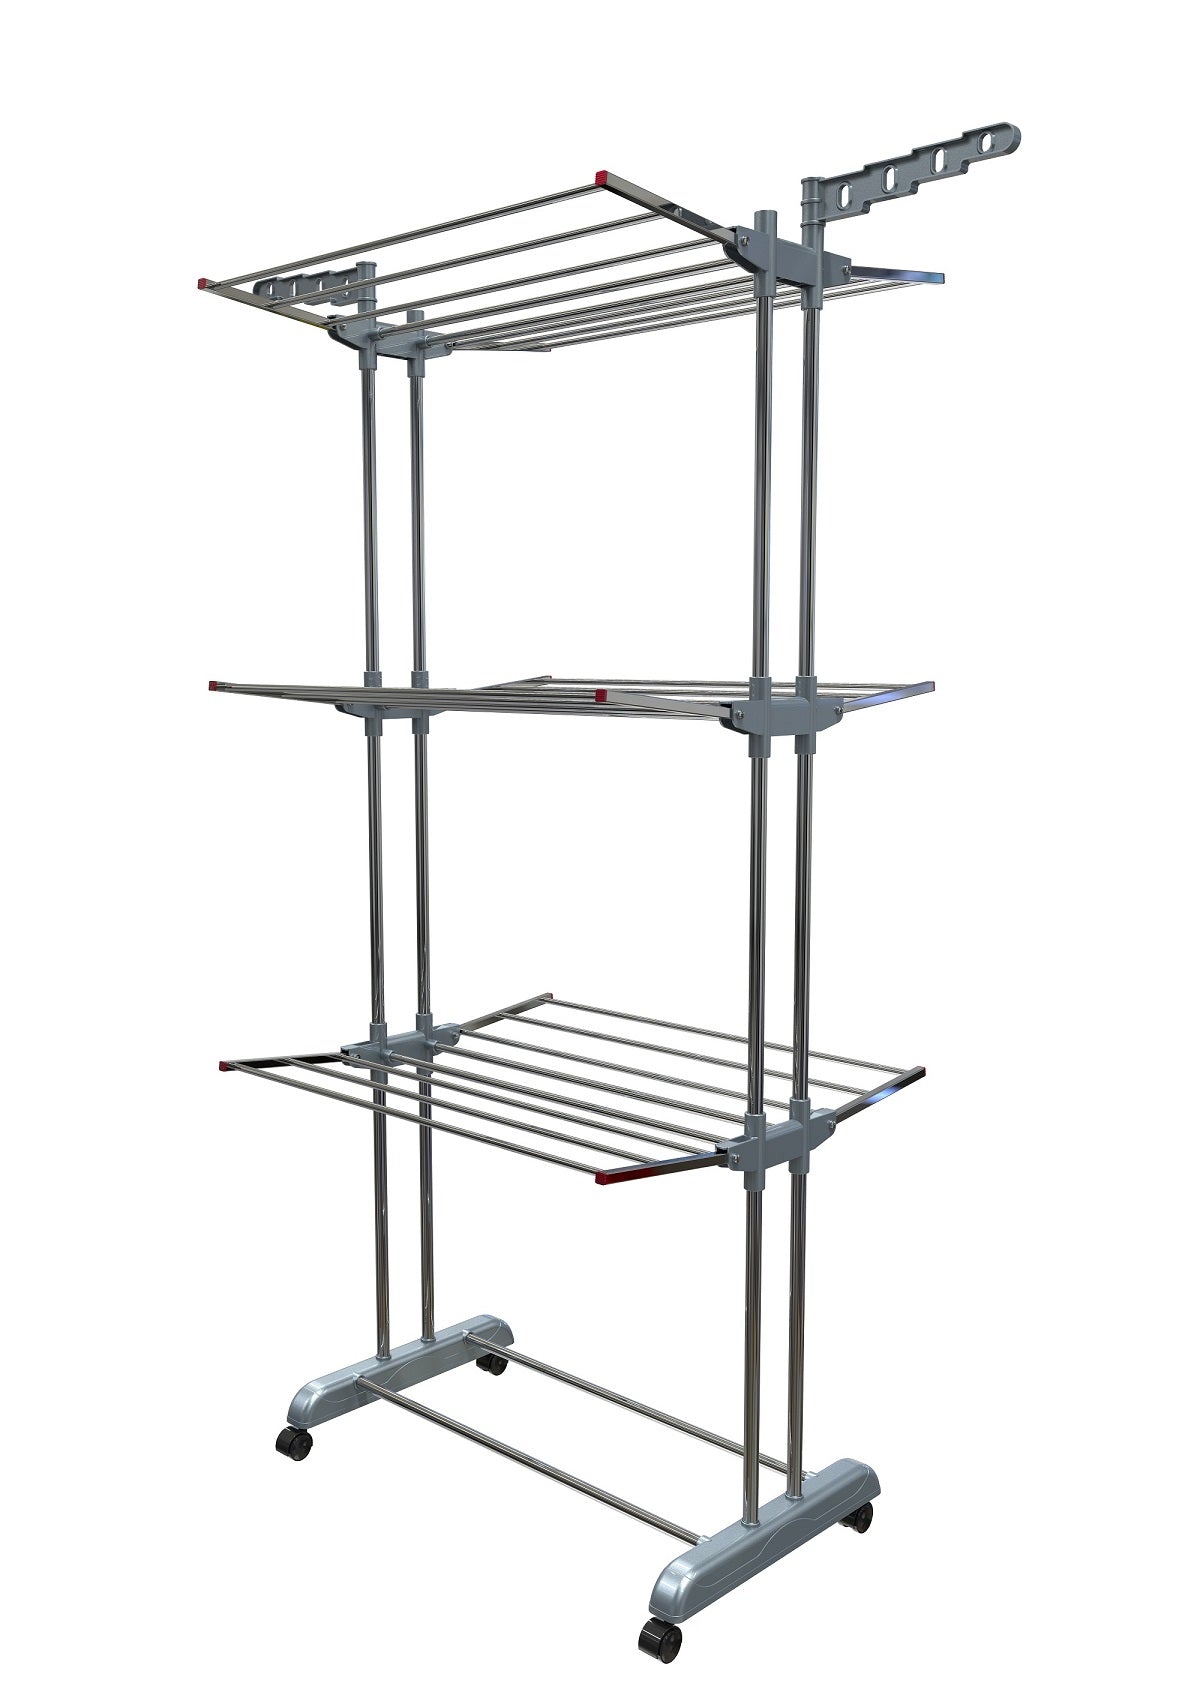 Cloths Drying Stand - Stainless Steel